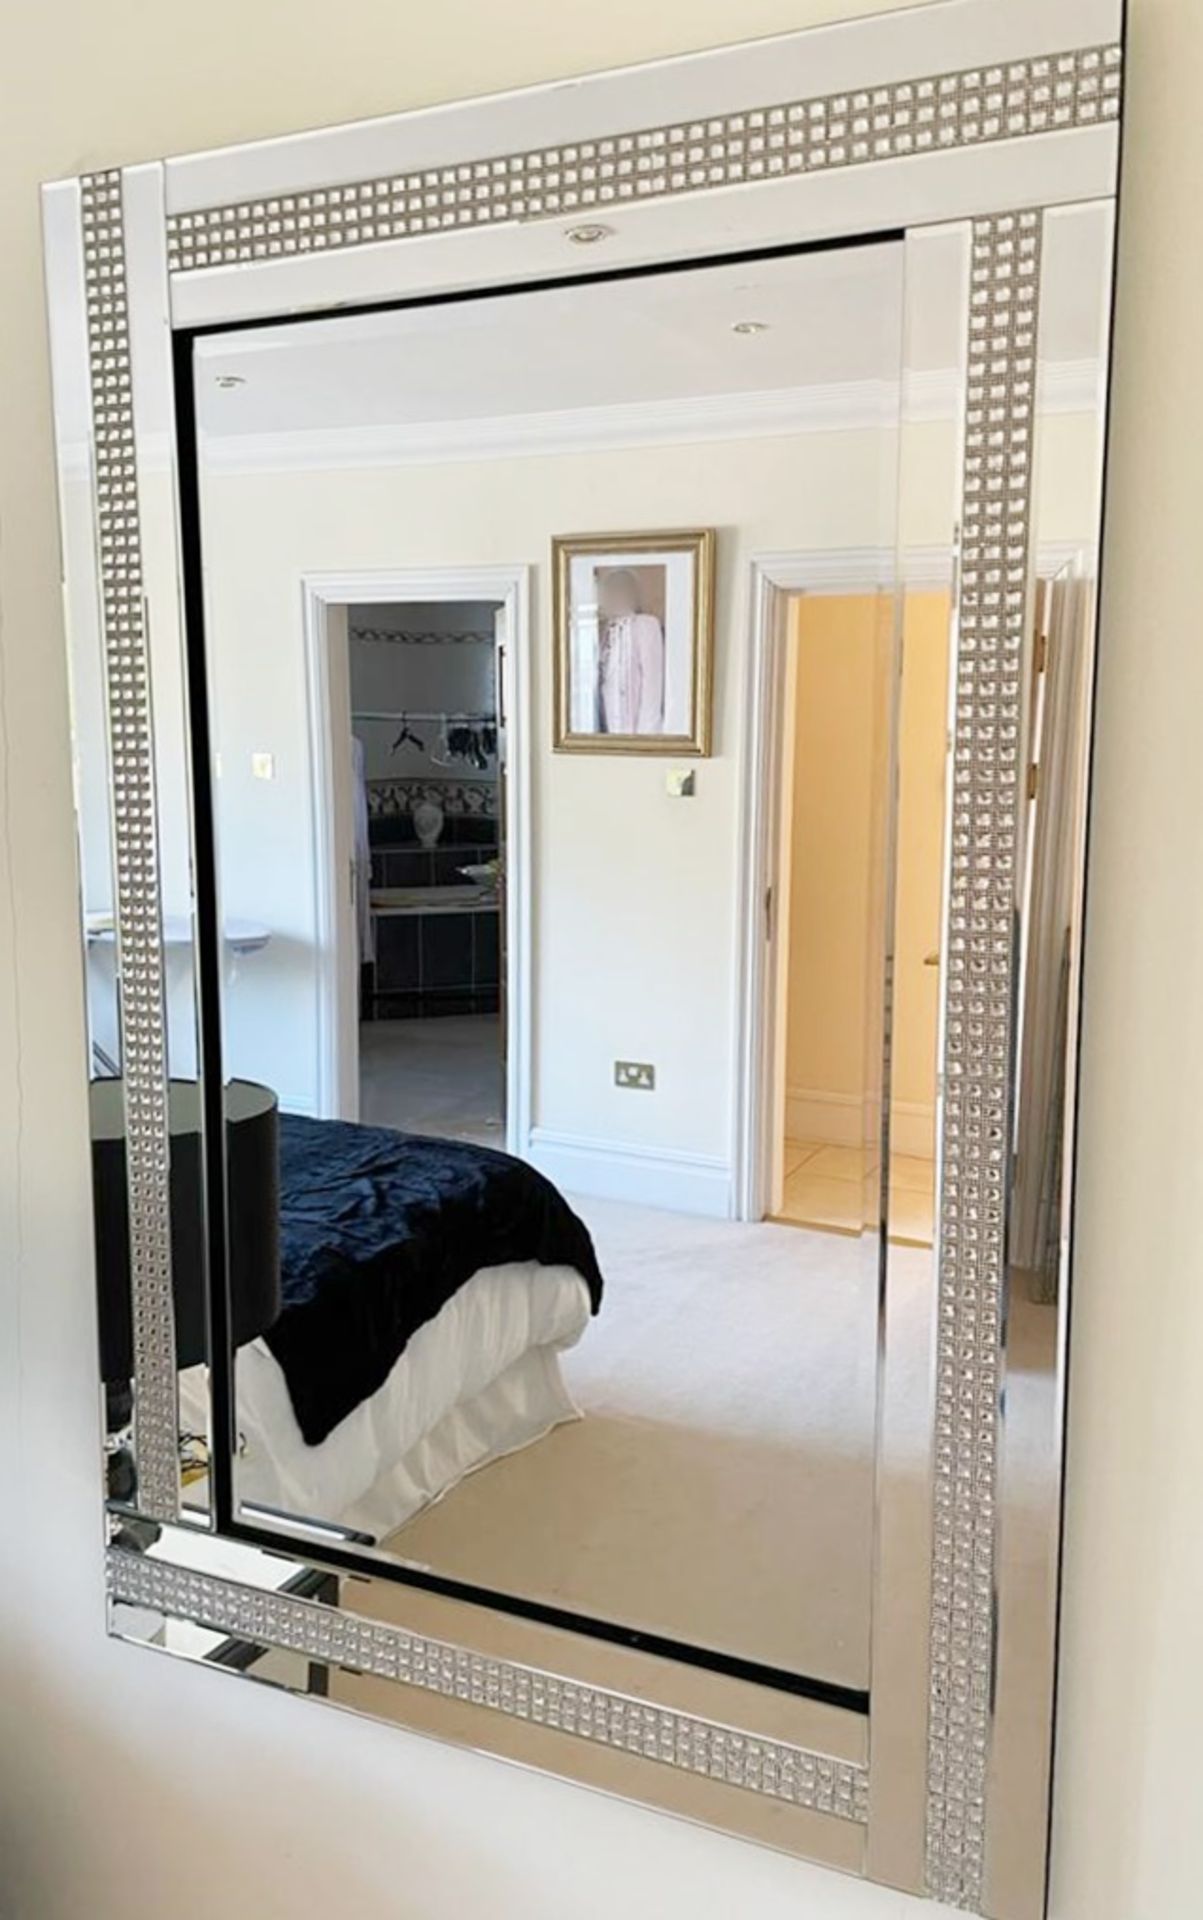 2 x Triple Glass Framed Wall Mirrors With Diamond Effect Border - Size: 80 x 120 cms - NO VAT ON THE - Image 4 of 4